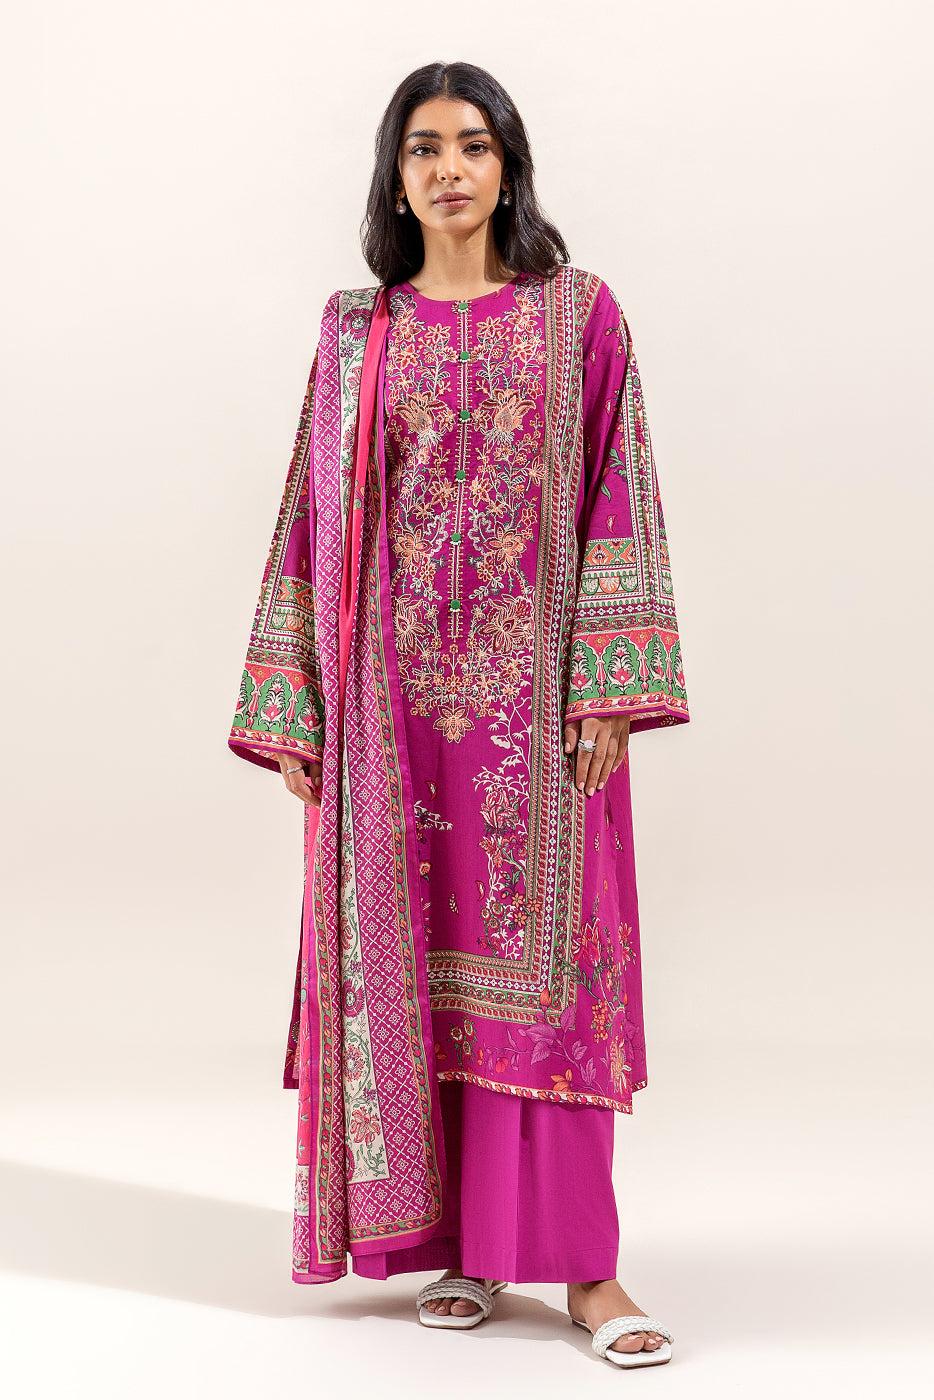 2 PIECE - EMBROIDERED LAWN SUIT - AMETHYST PEACH (UNSTITCHED)